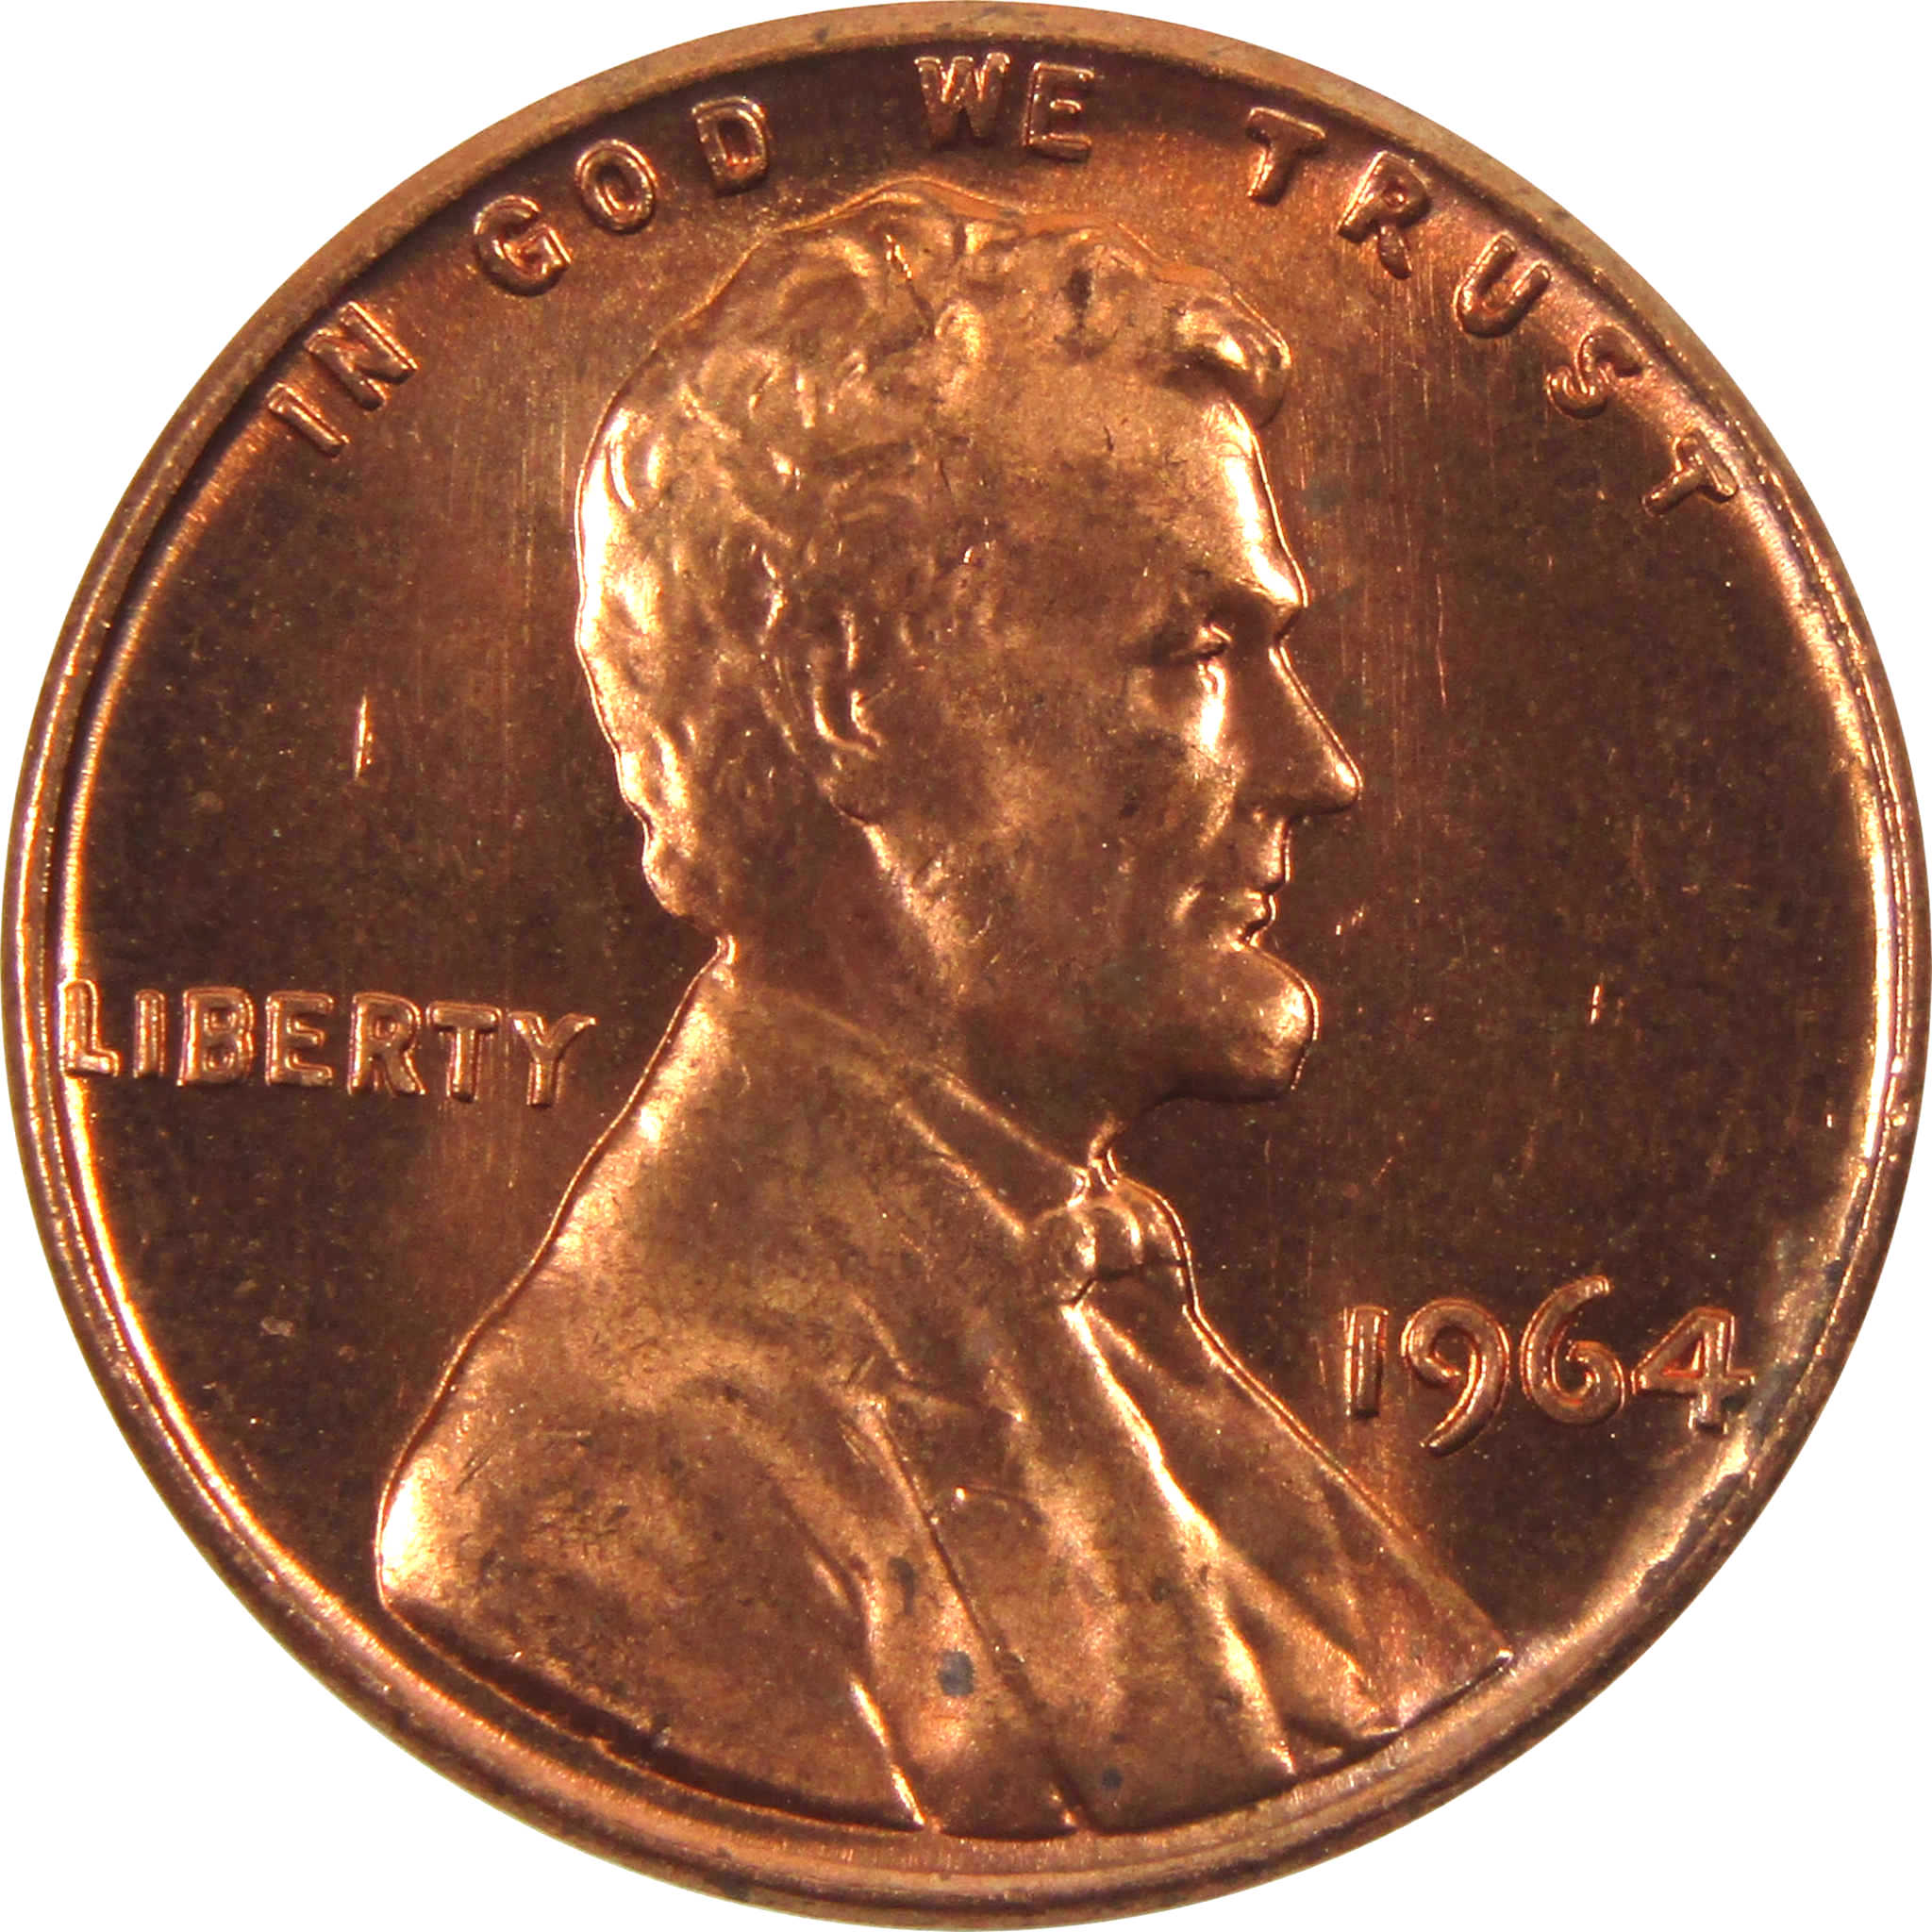 1964 Lincoln Memorial Cent BU Uncirculated Penny 1c Coin